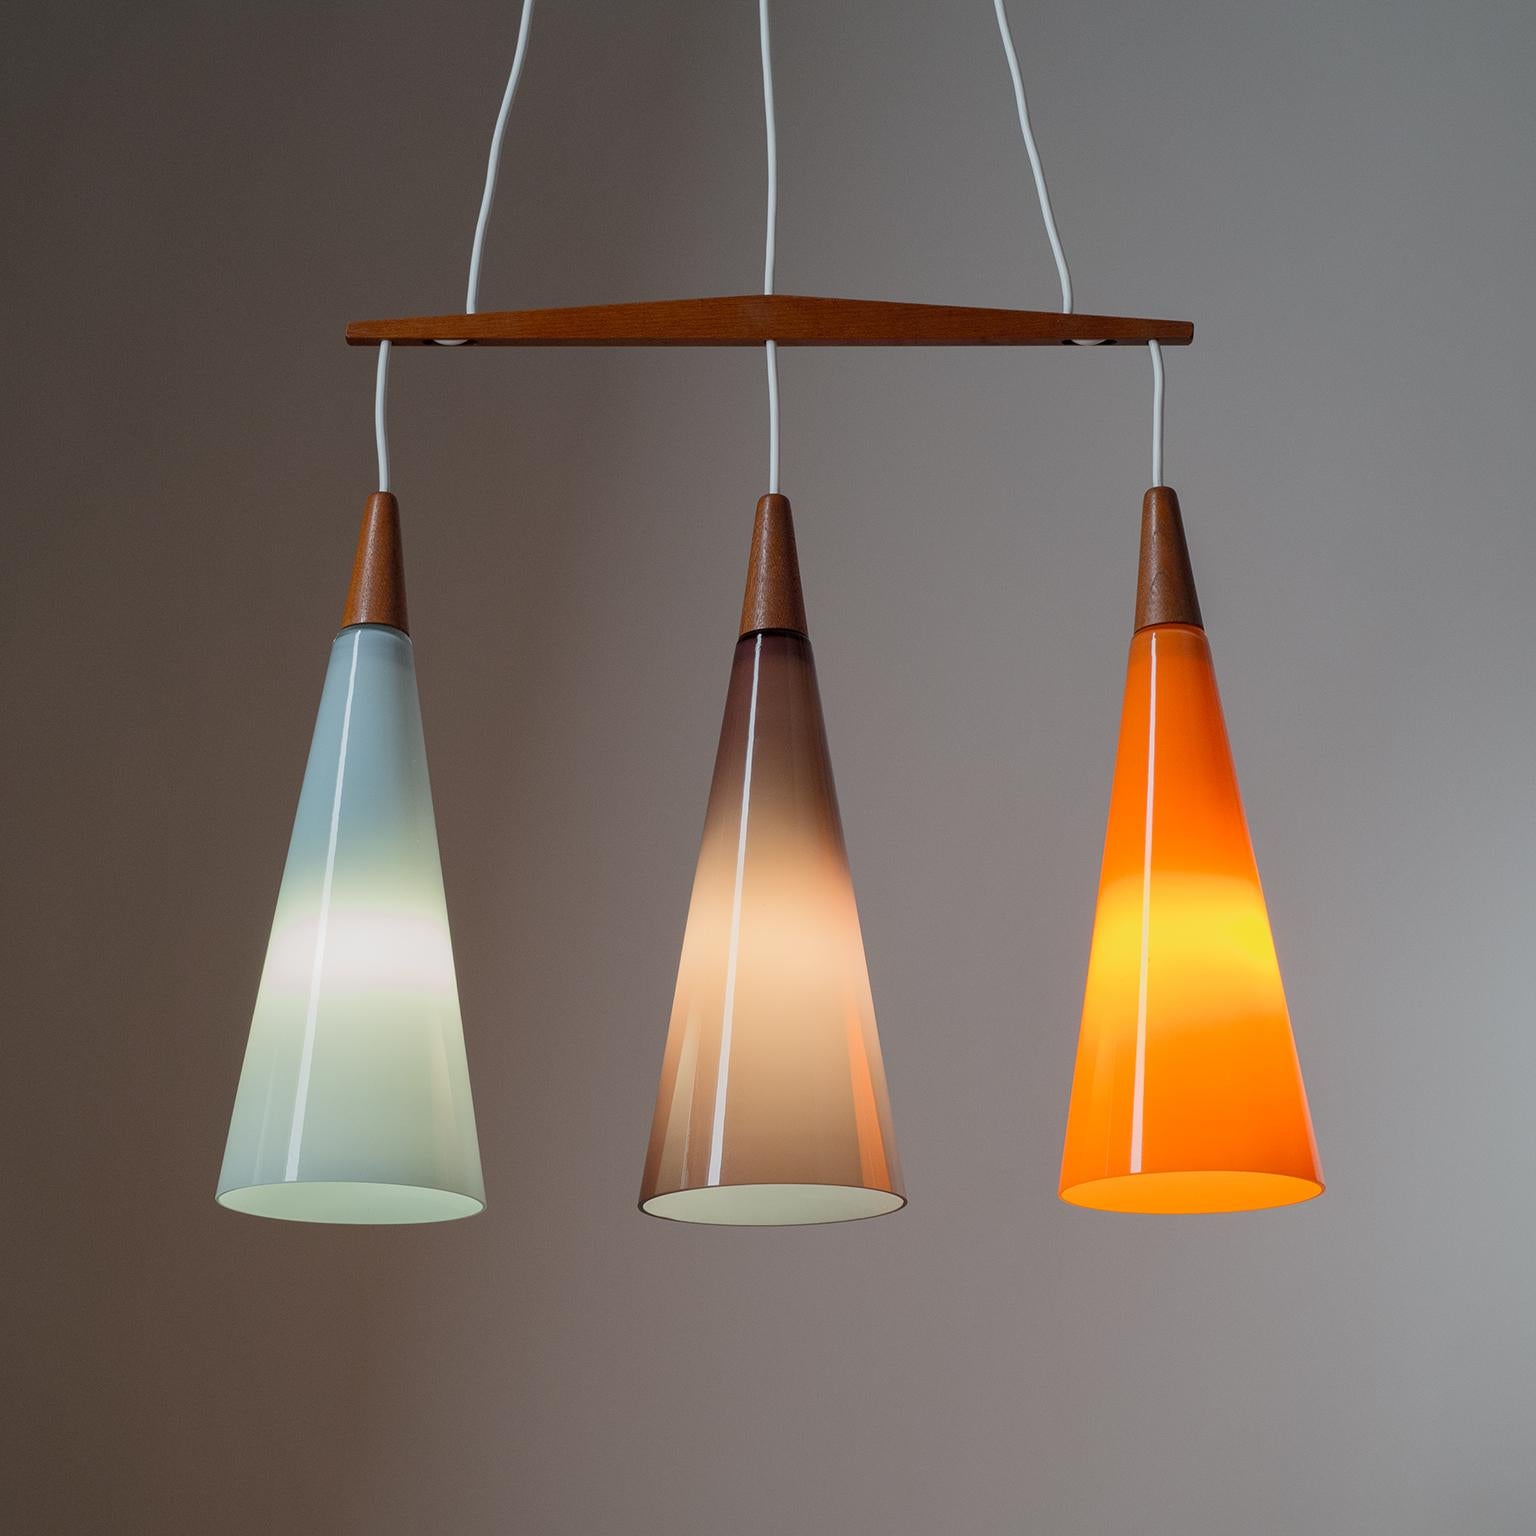 Danish Suspension Chandelier, 1960s, Colored Glass and Teak 5